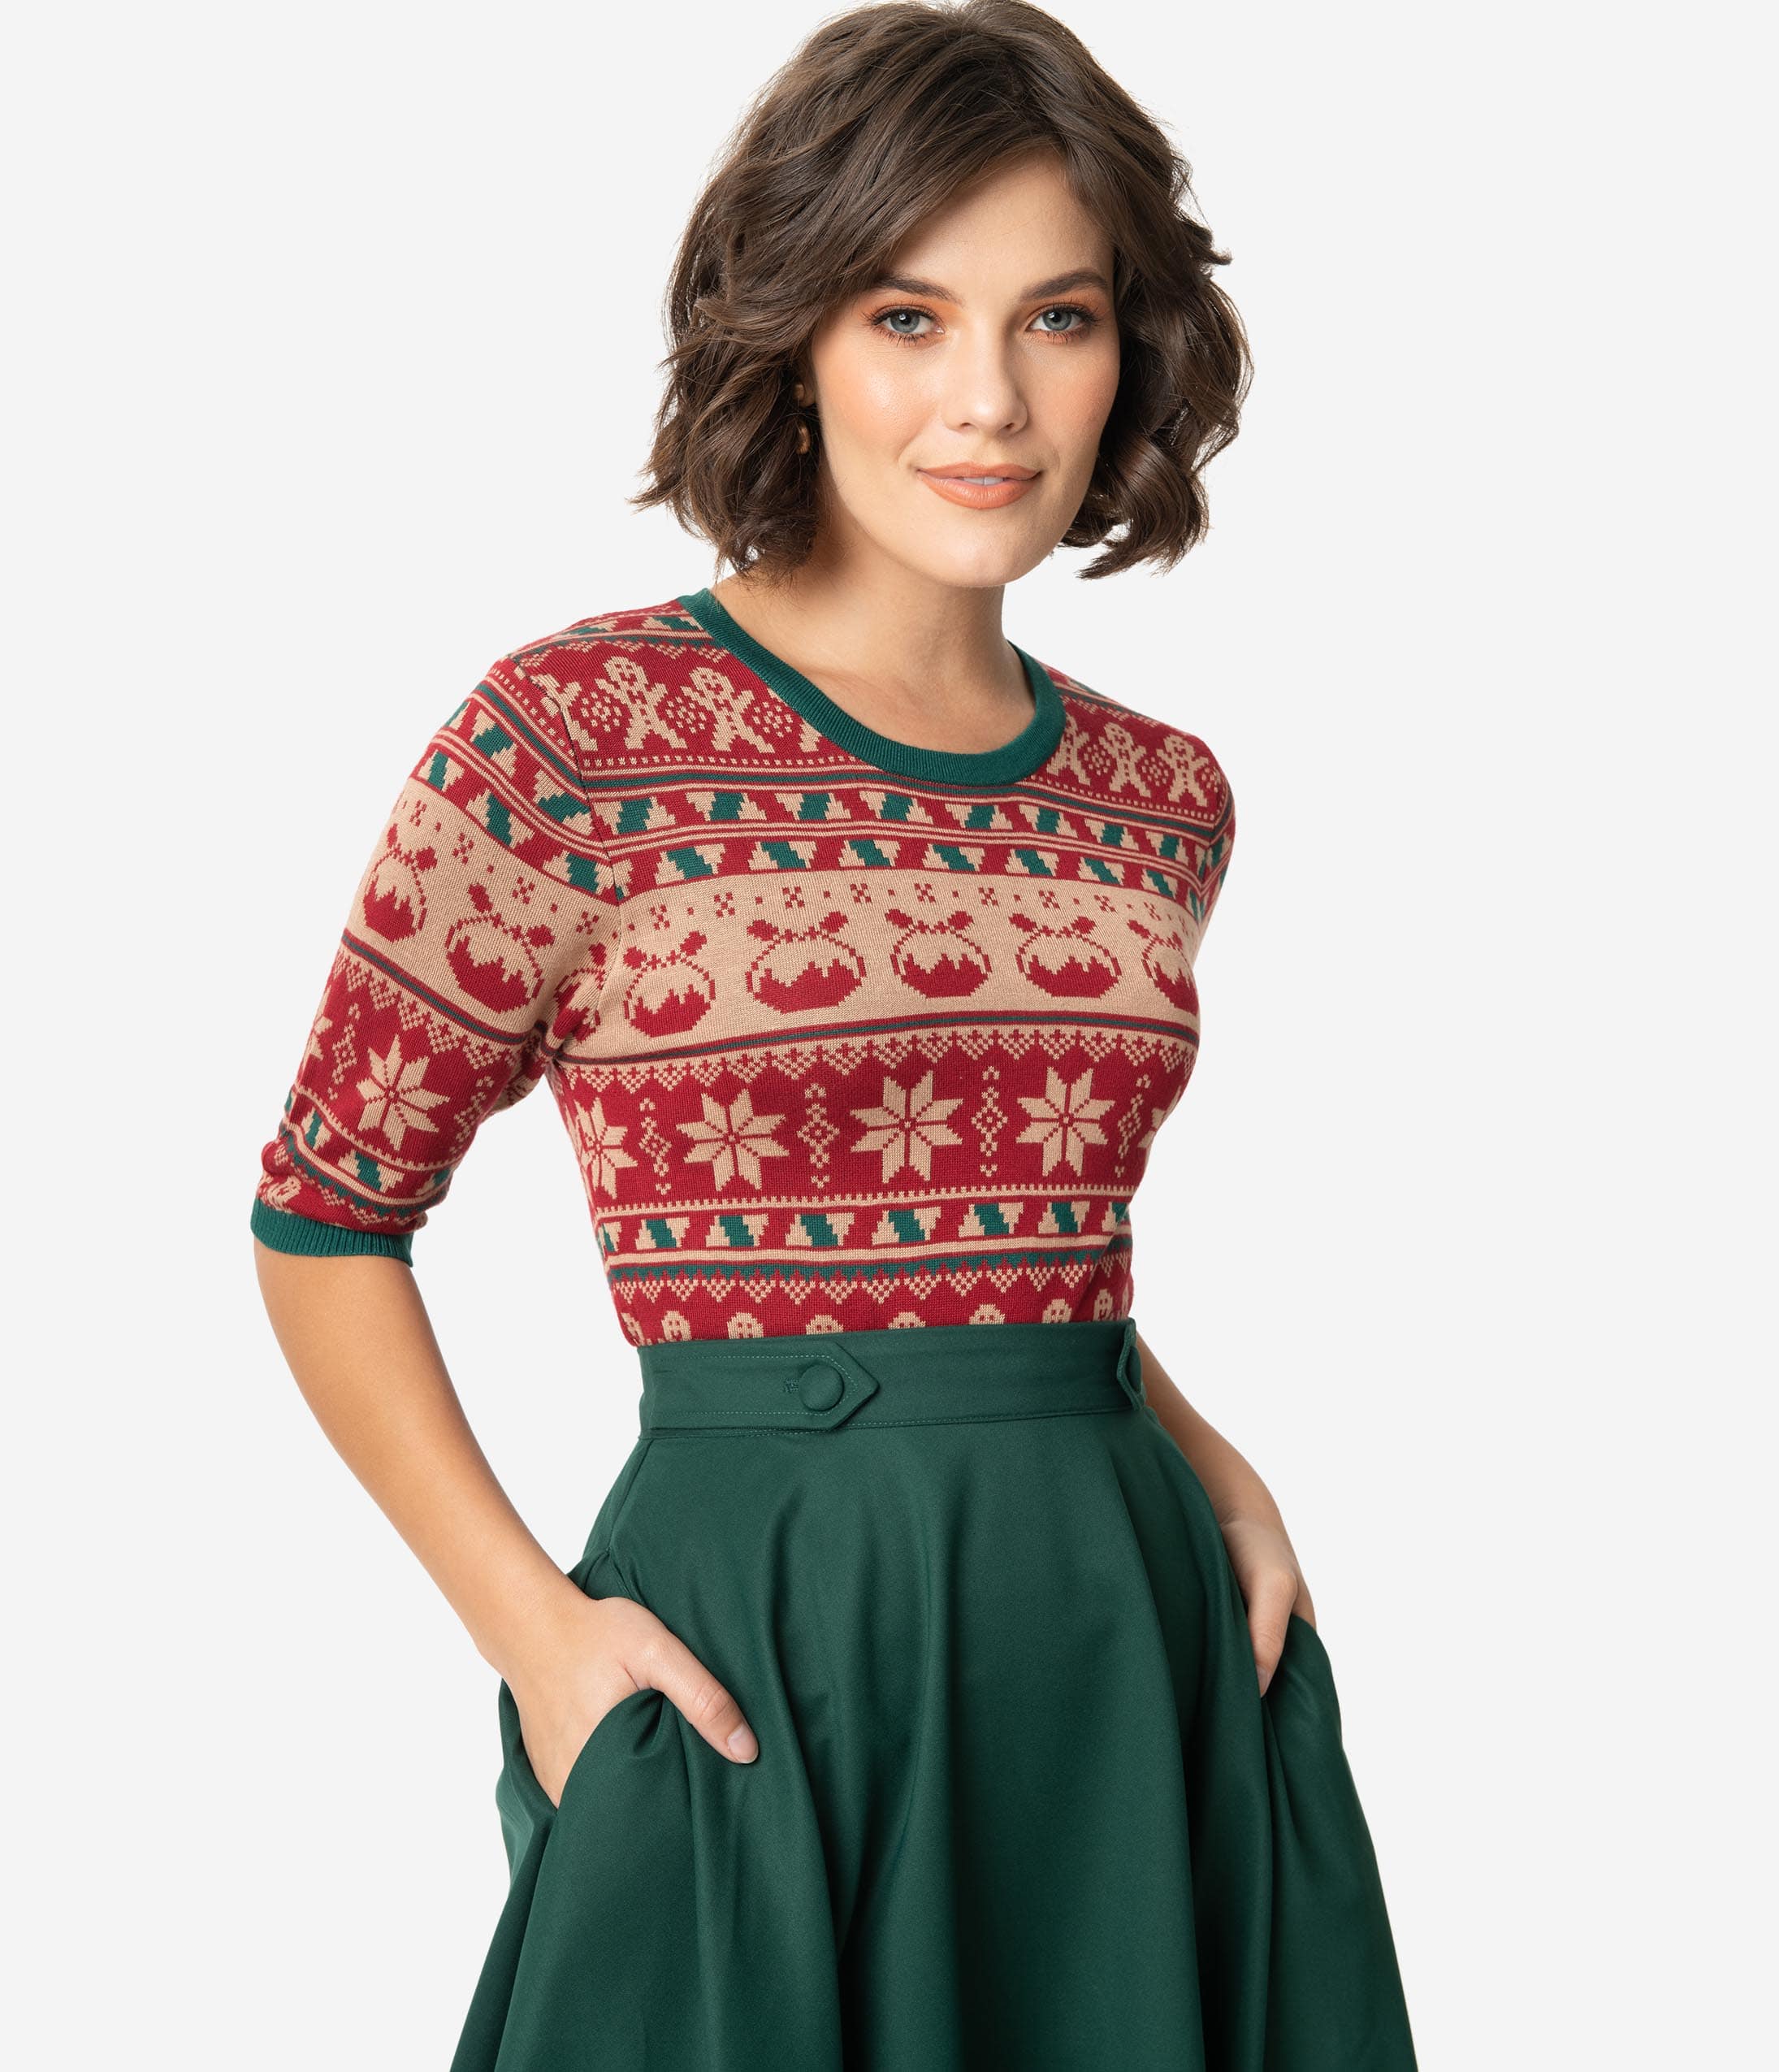 

Retro Style Red & Green Holiday Fair Isle Knit Sweater